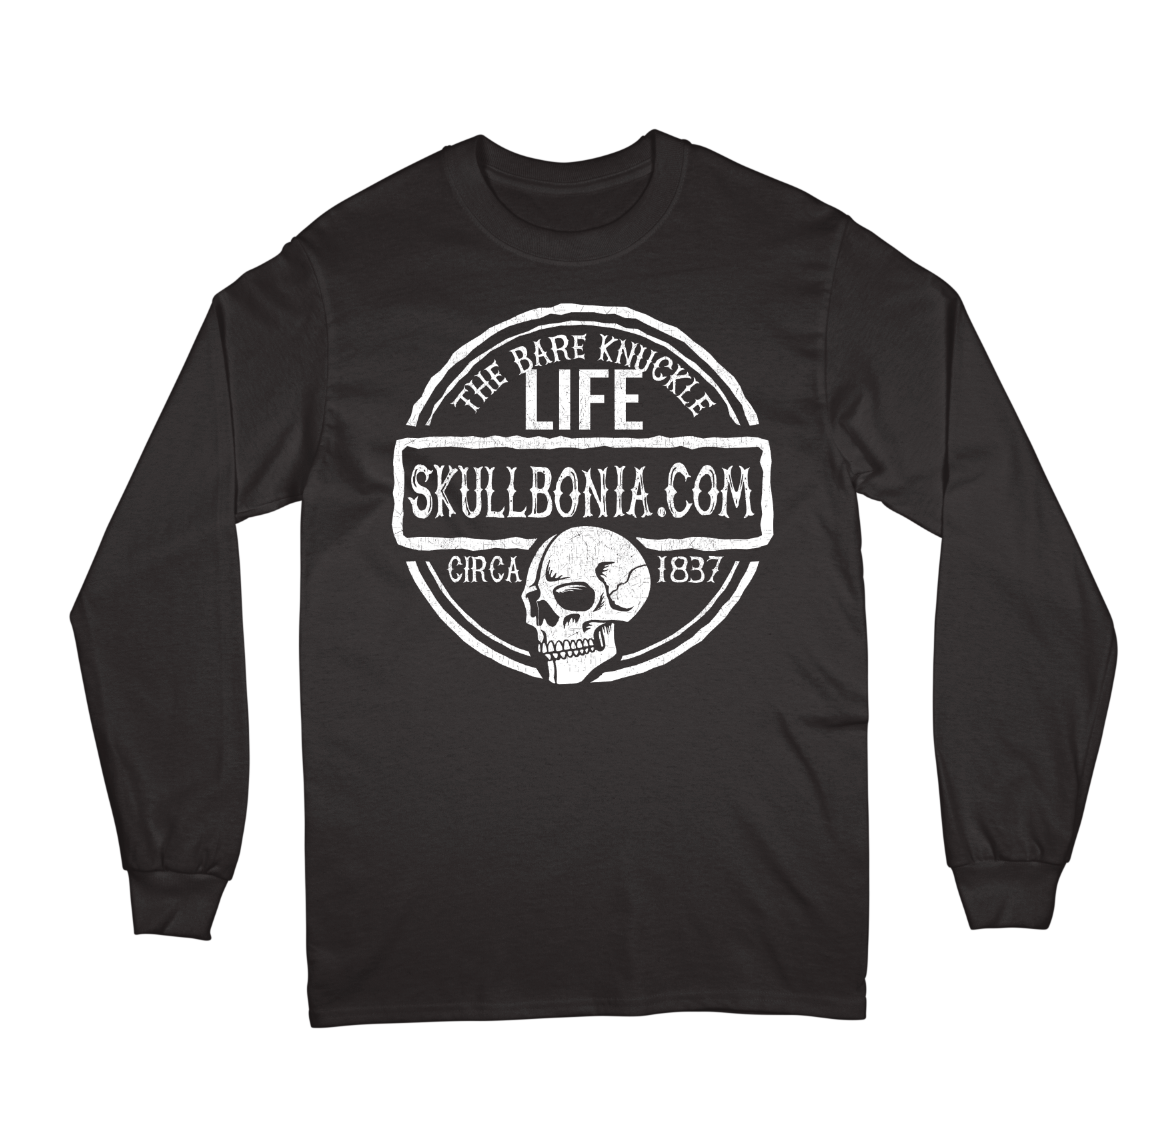 The Bare Knuckle Life Skull Long